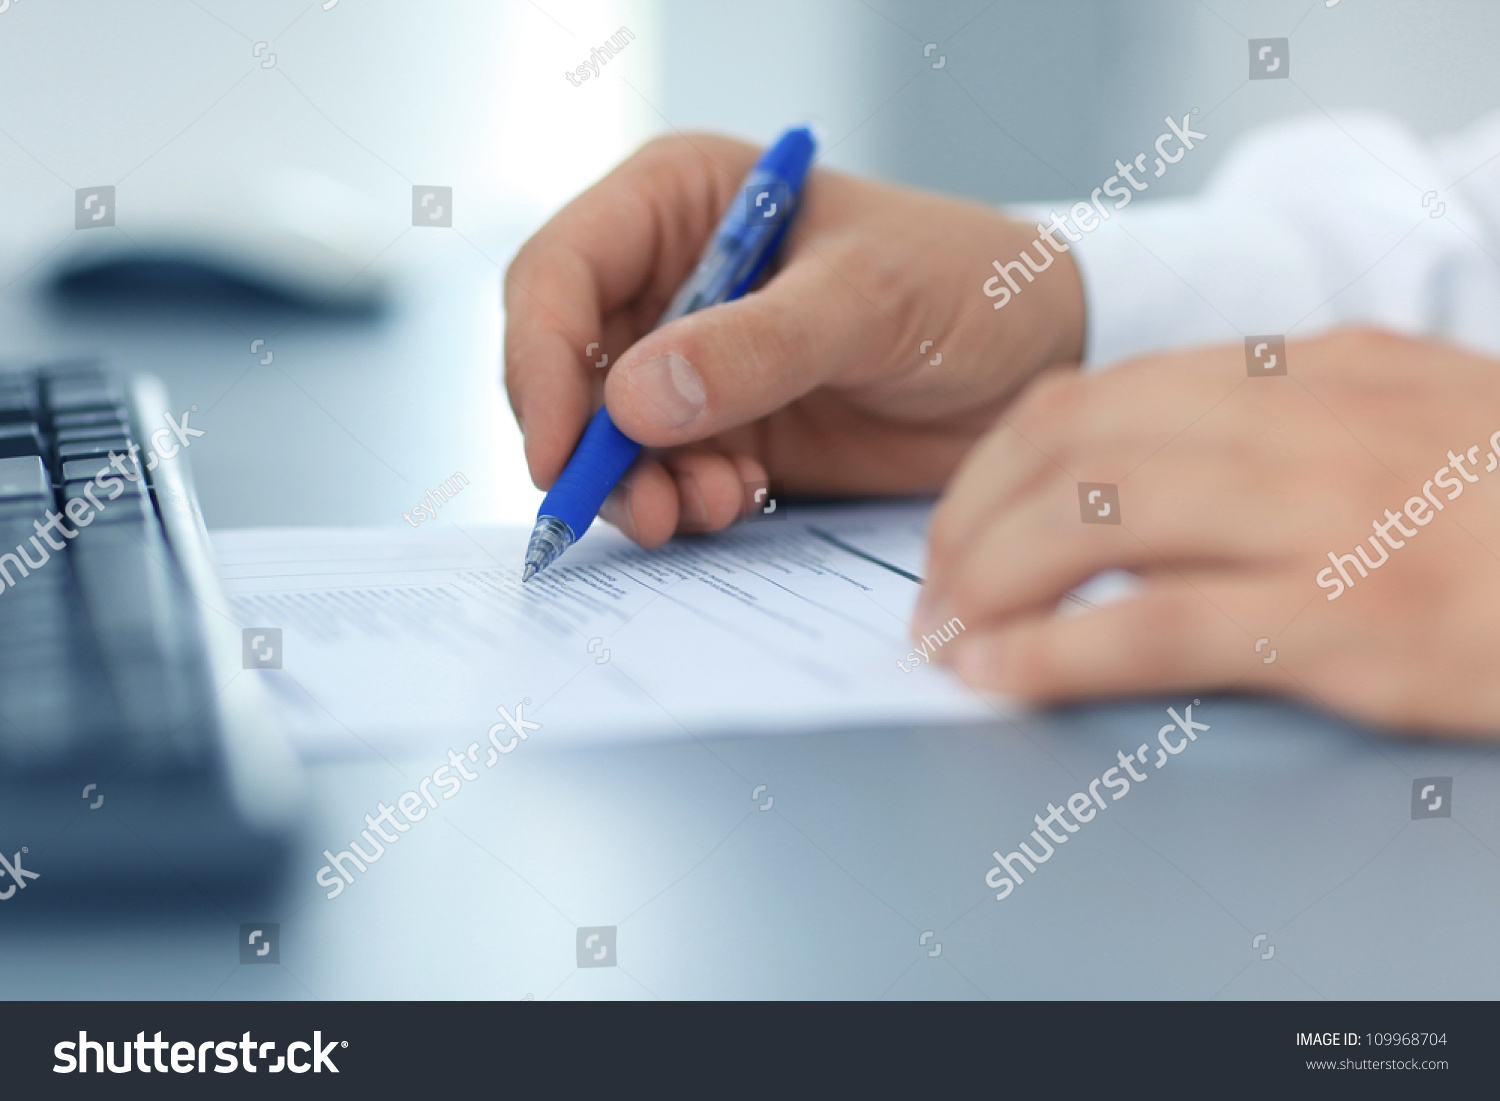 Hands Writing On Paper Stock Photo 109968704 - Shutterstock